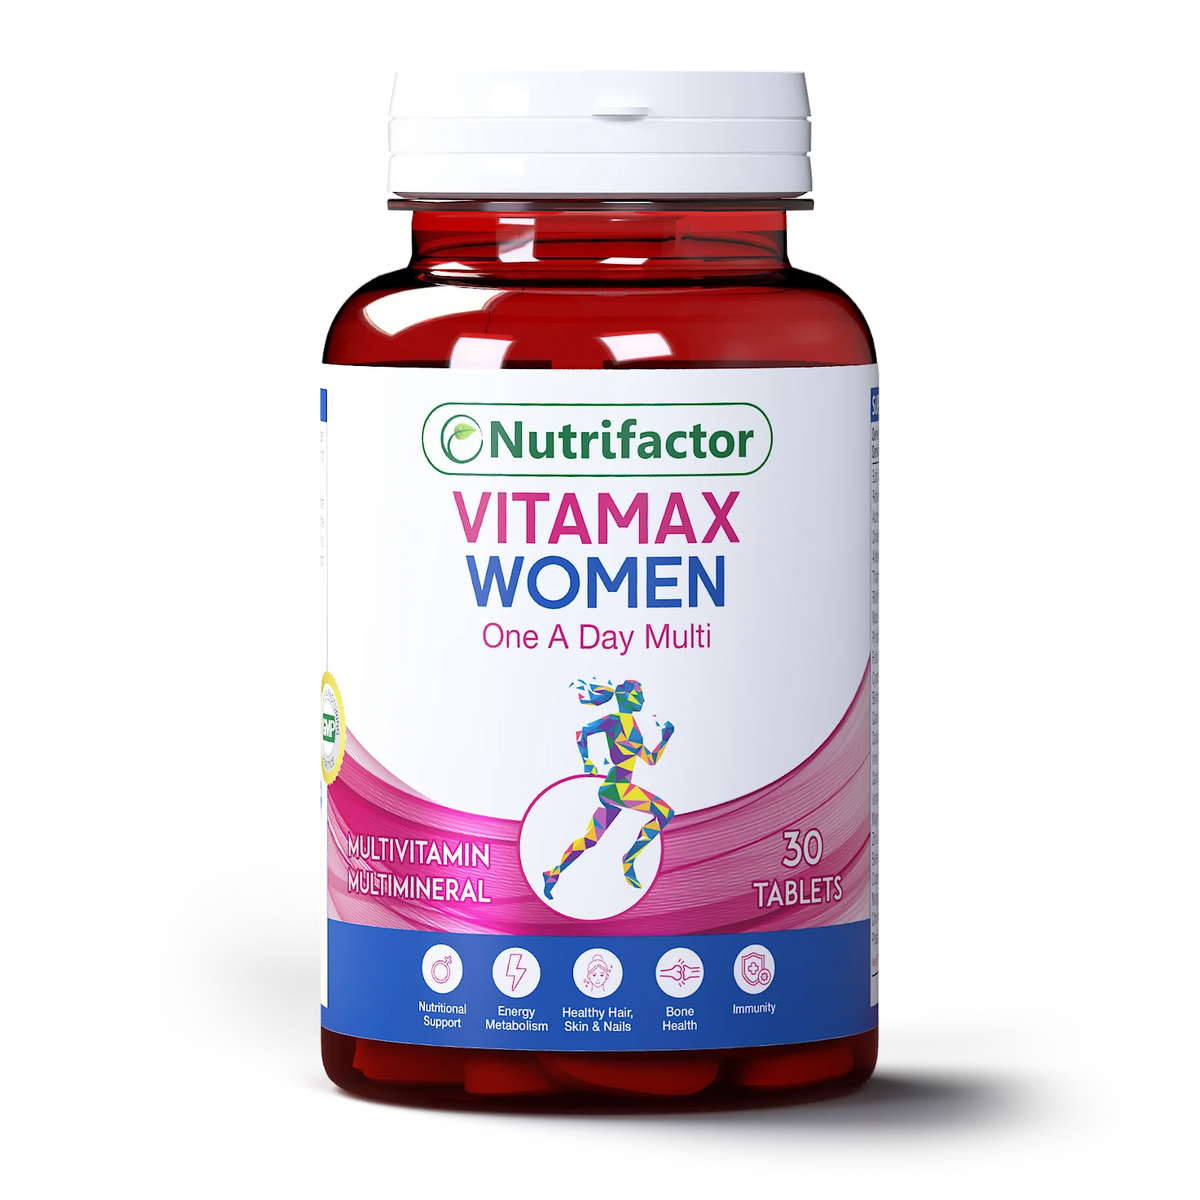 Nutrifactor Vitamax Women - Once A Day Multi Tablets 30s